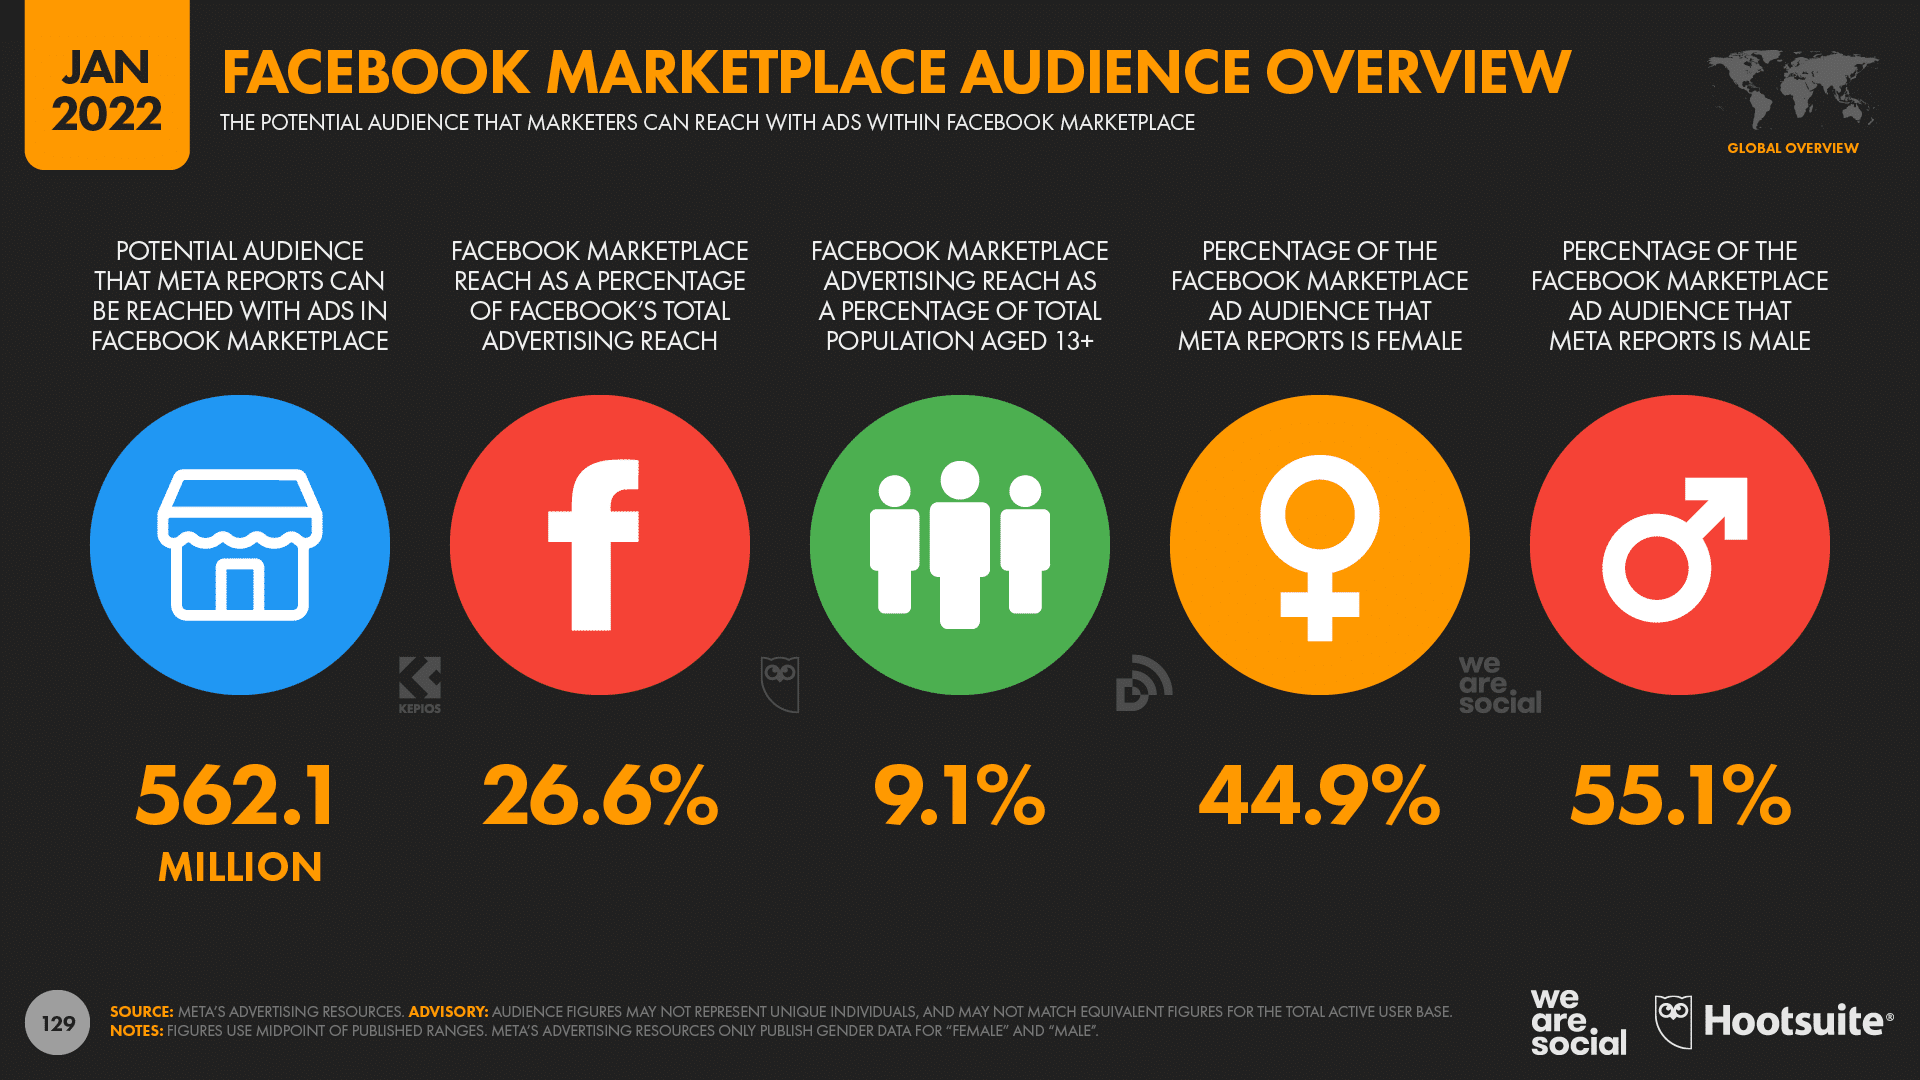 chart showing Facebook Marketplace audience overview